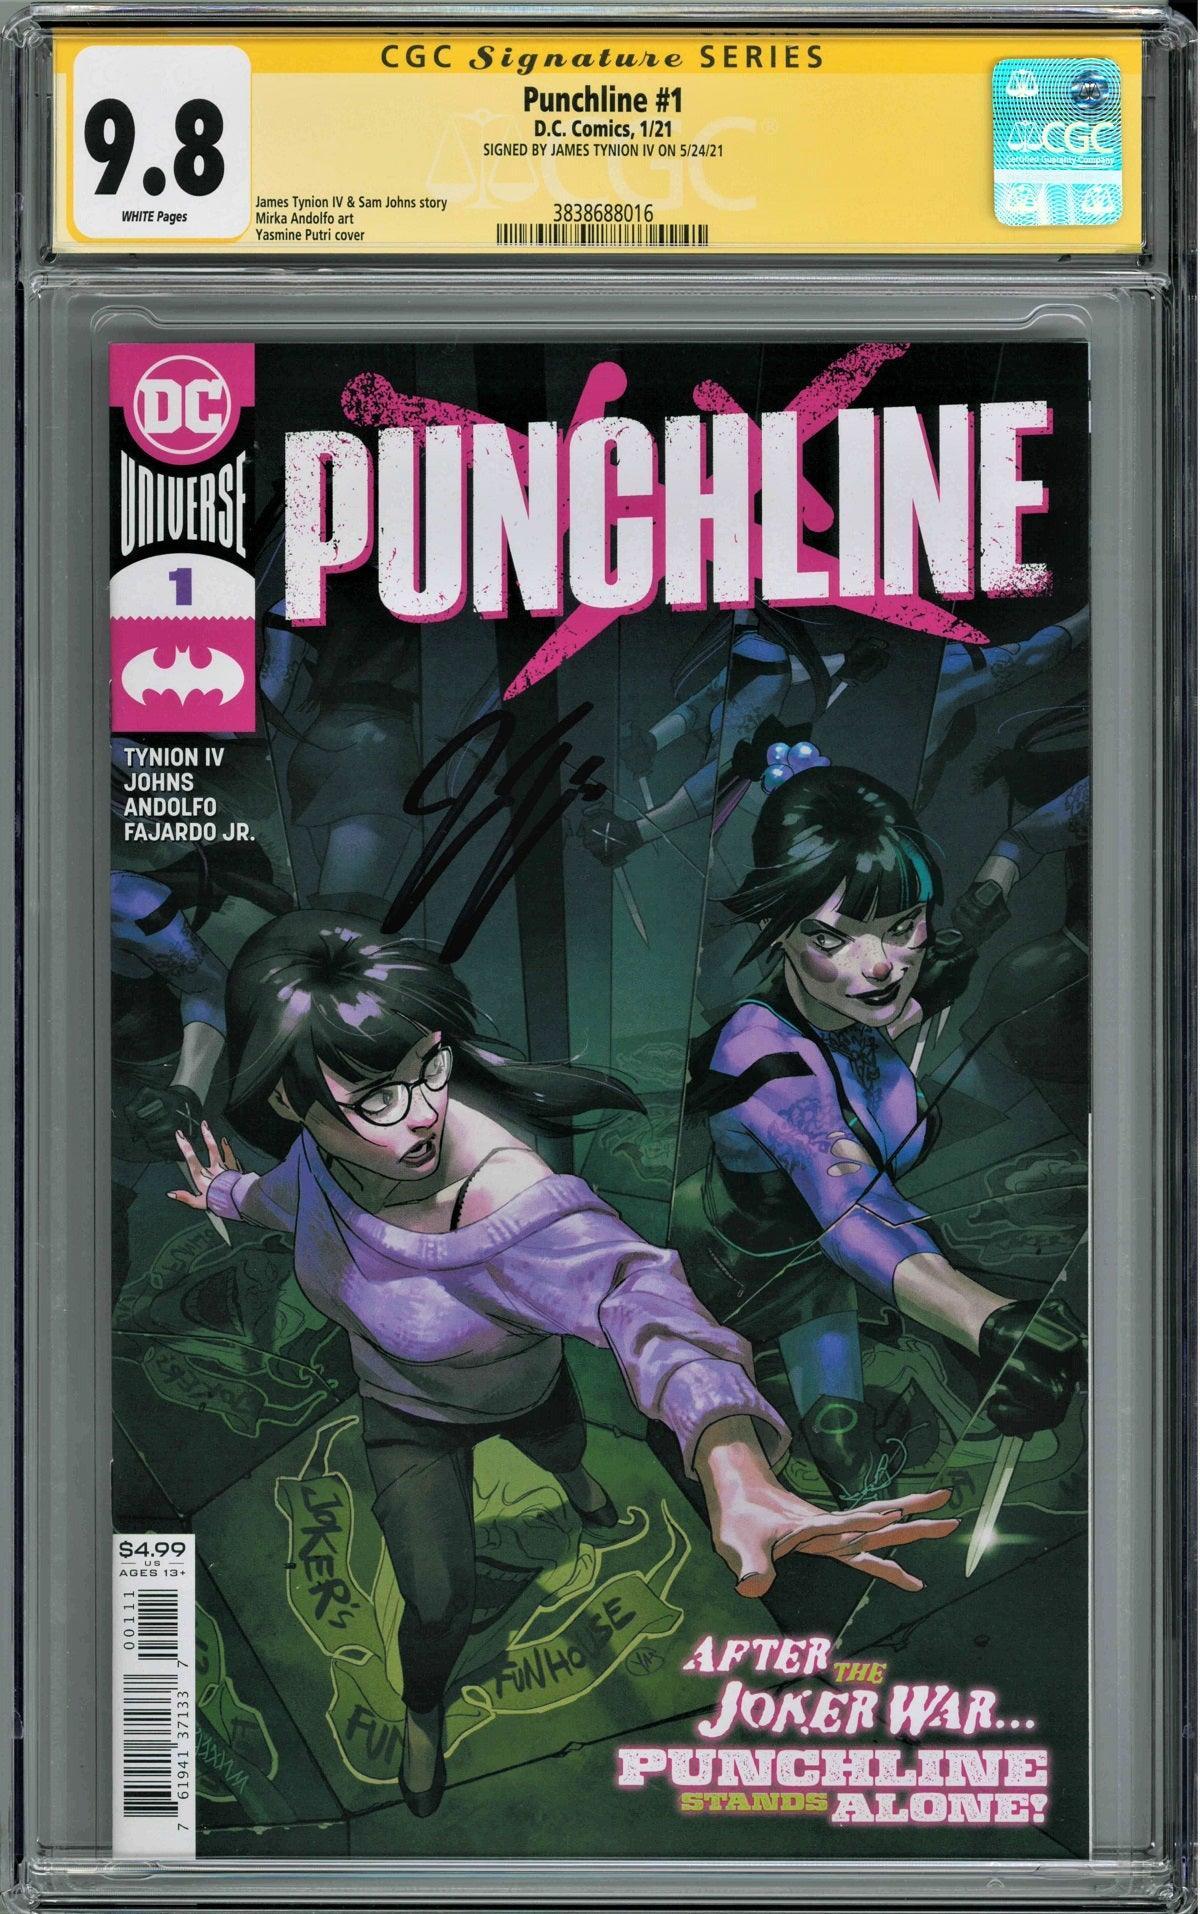 CGC PUNCHLINE #1 (9.8) SIGNATURE SERIES - SIGNED BY JAMES TYNION IV - Kings Comics